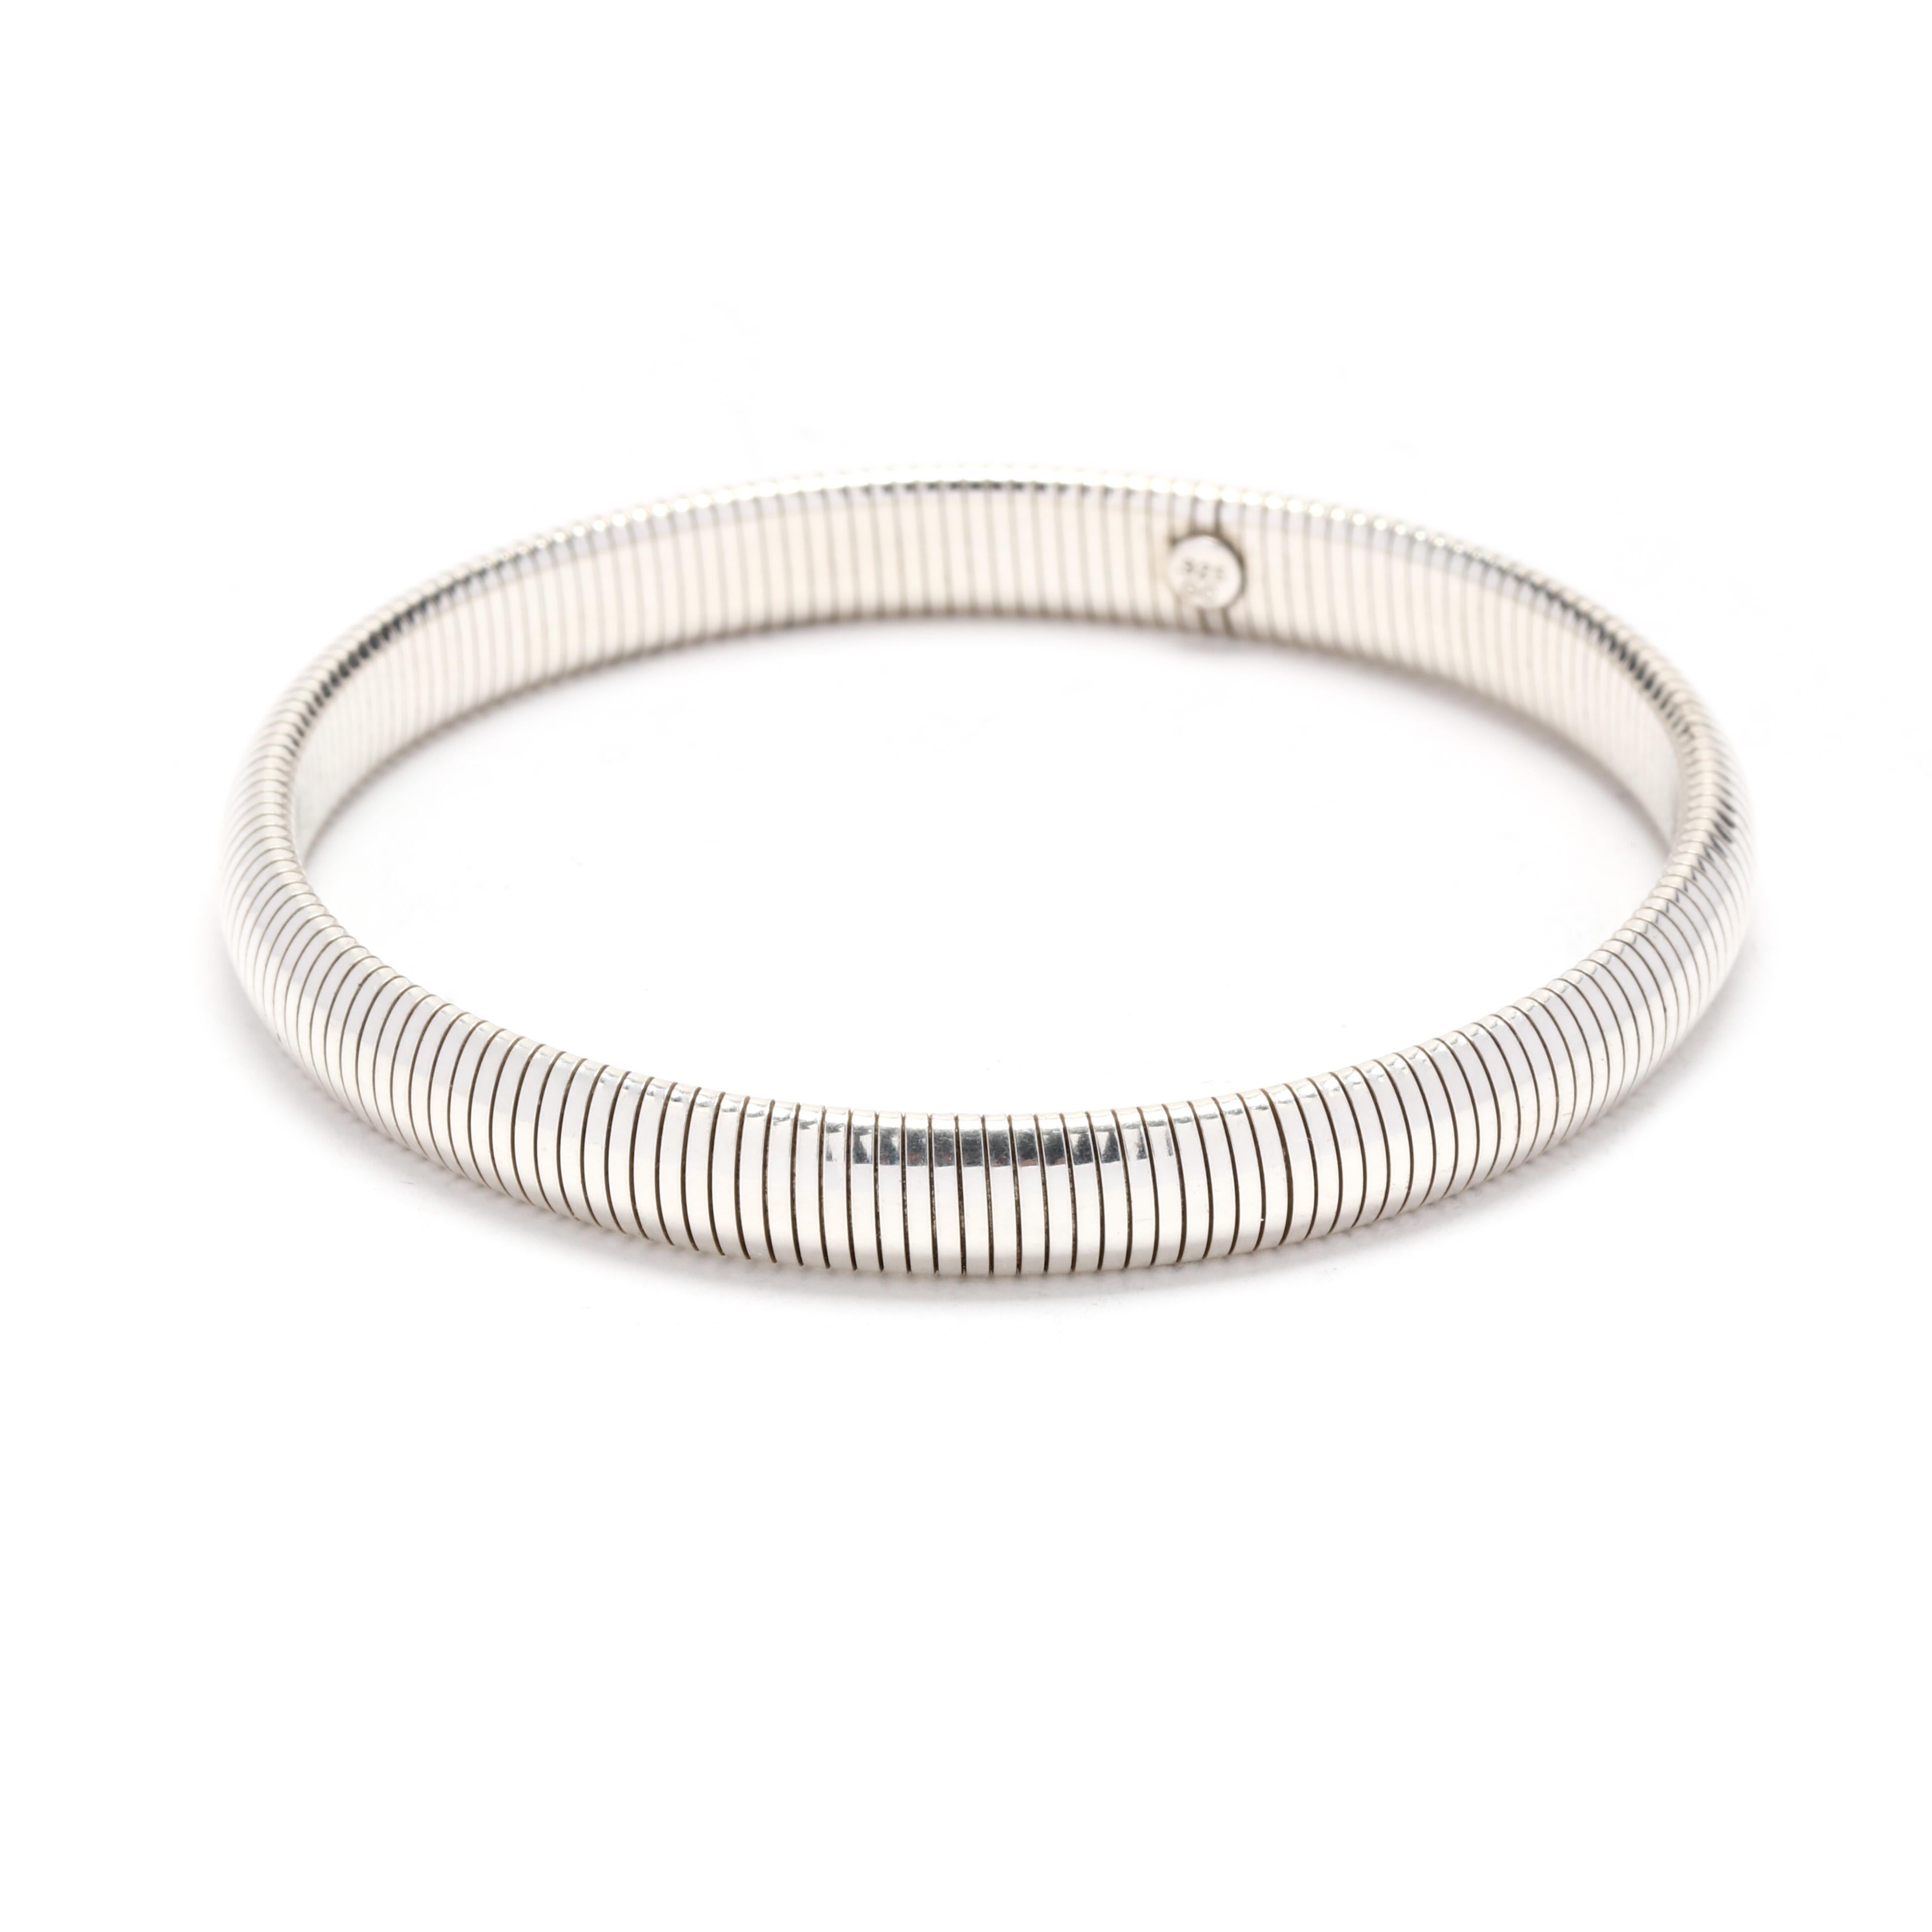 A vintage sterling silver stretchy snake bangle bracelet. This simple bracelet features a flexible snake chain in a bangle design.  It is stamped 925 GC.

Length: 7 inches interior circumference

Width: 1/4 inch

Weight: 8.8 dwt / 13.7 grams

Metal: